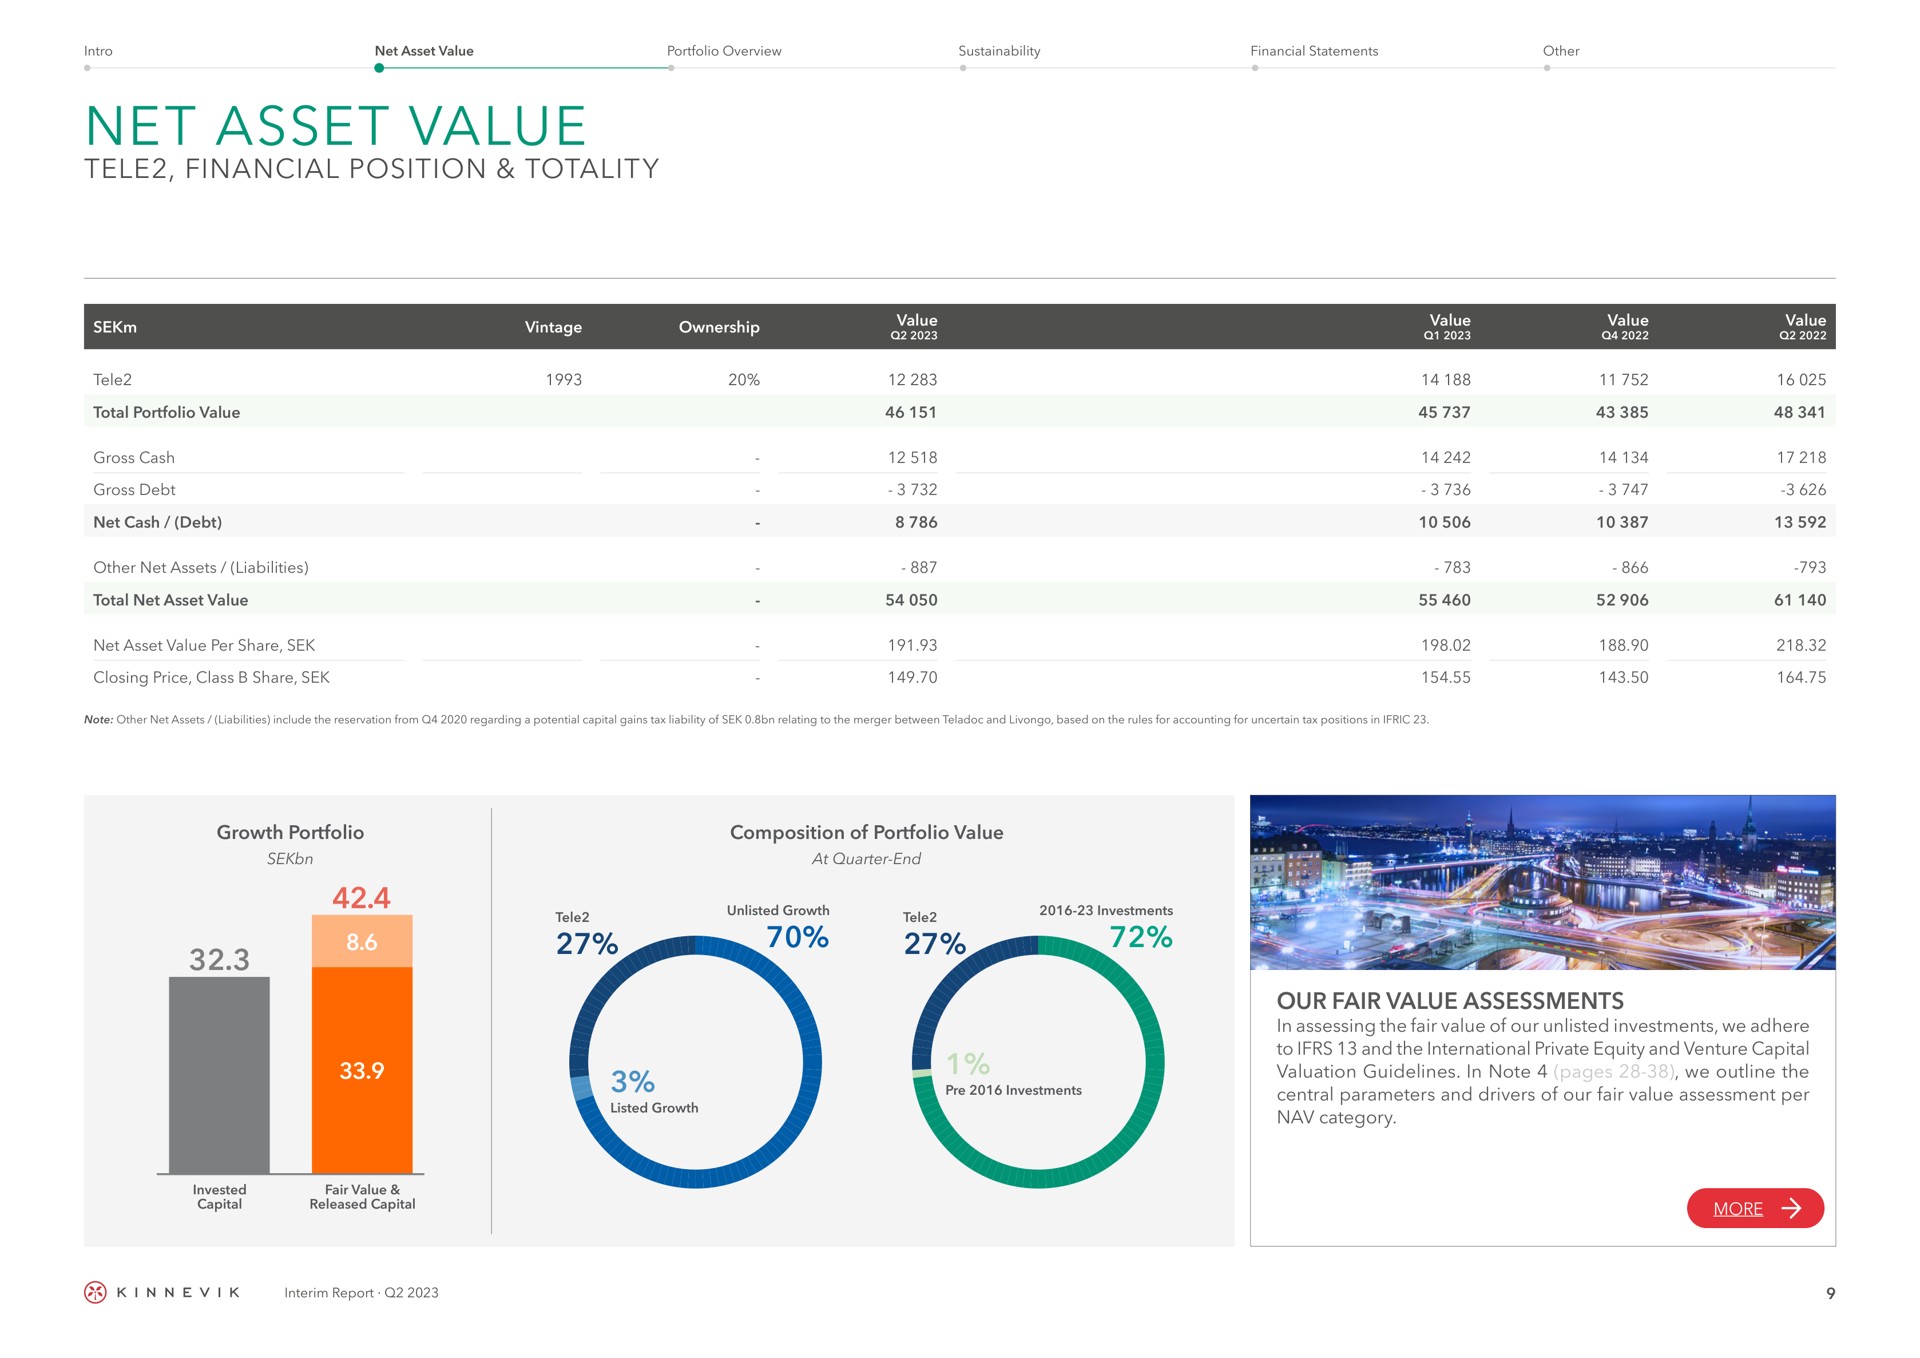 net asset value tele financial position our fair value assessments totality growth portfolio composition of portfolio investments interim report central parameters and drivers of assessment per | Kinnevik